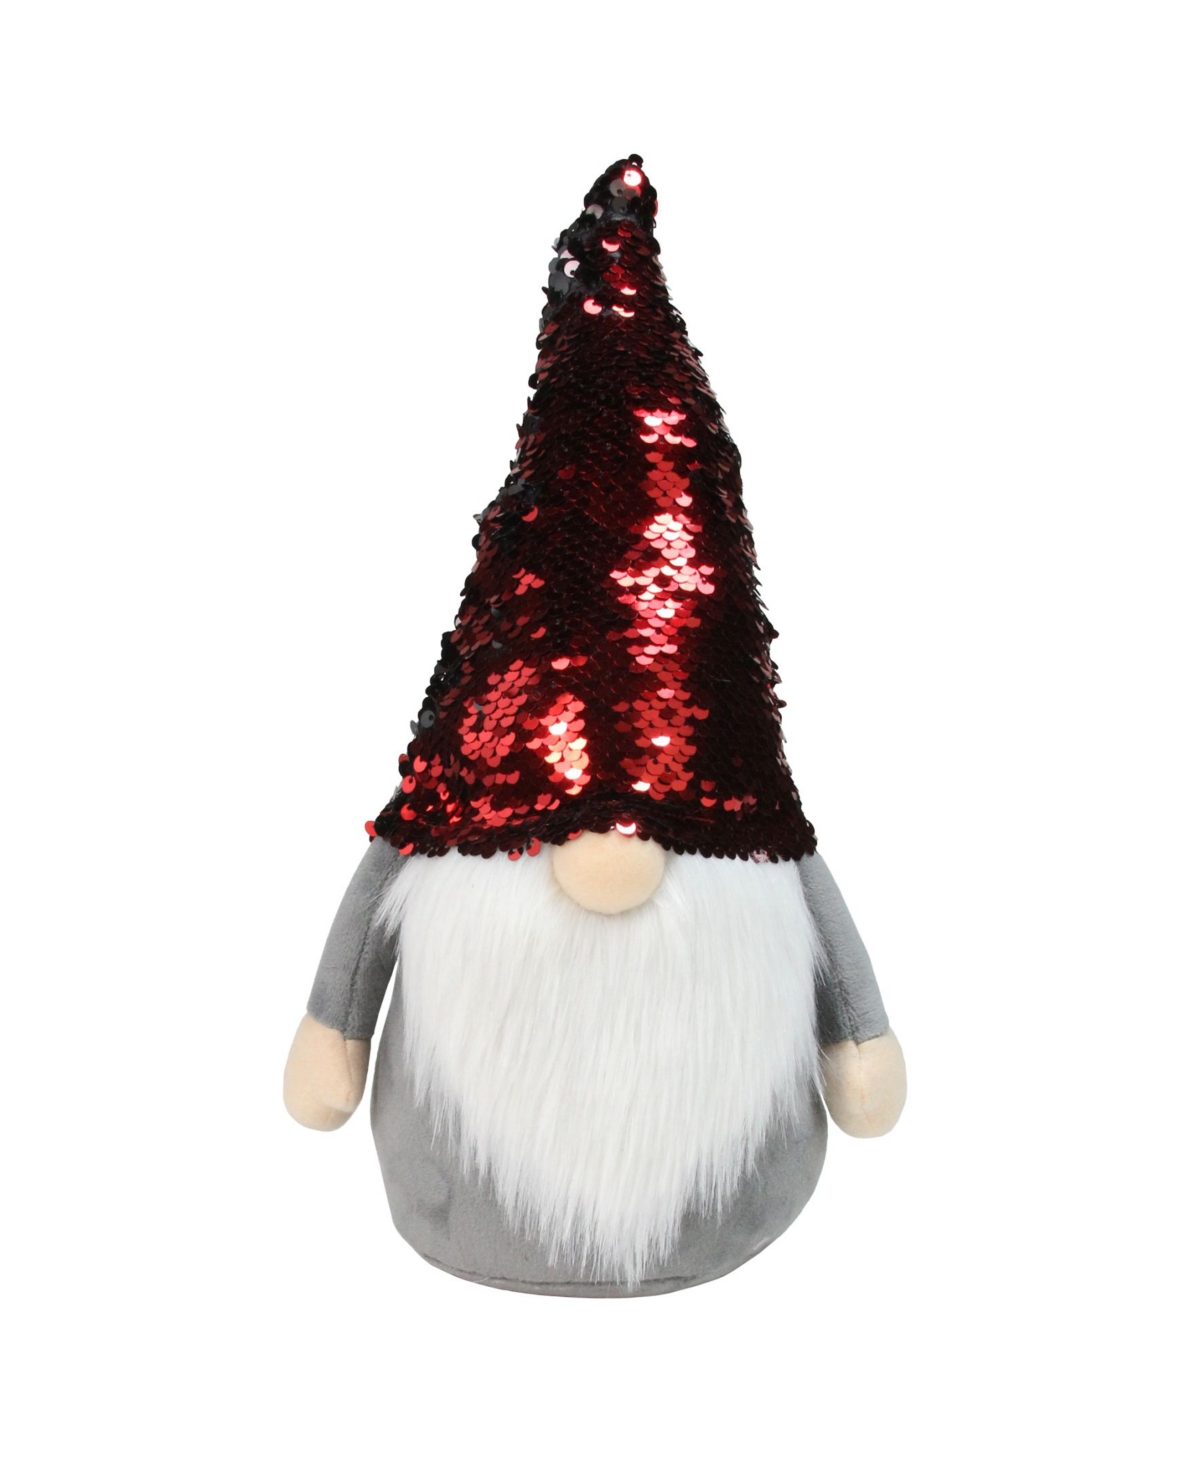 Gnome with Flip Sequin Hat Christmas Decoration - Red